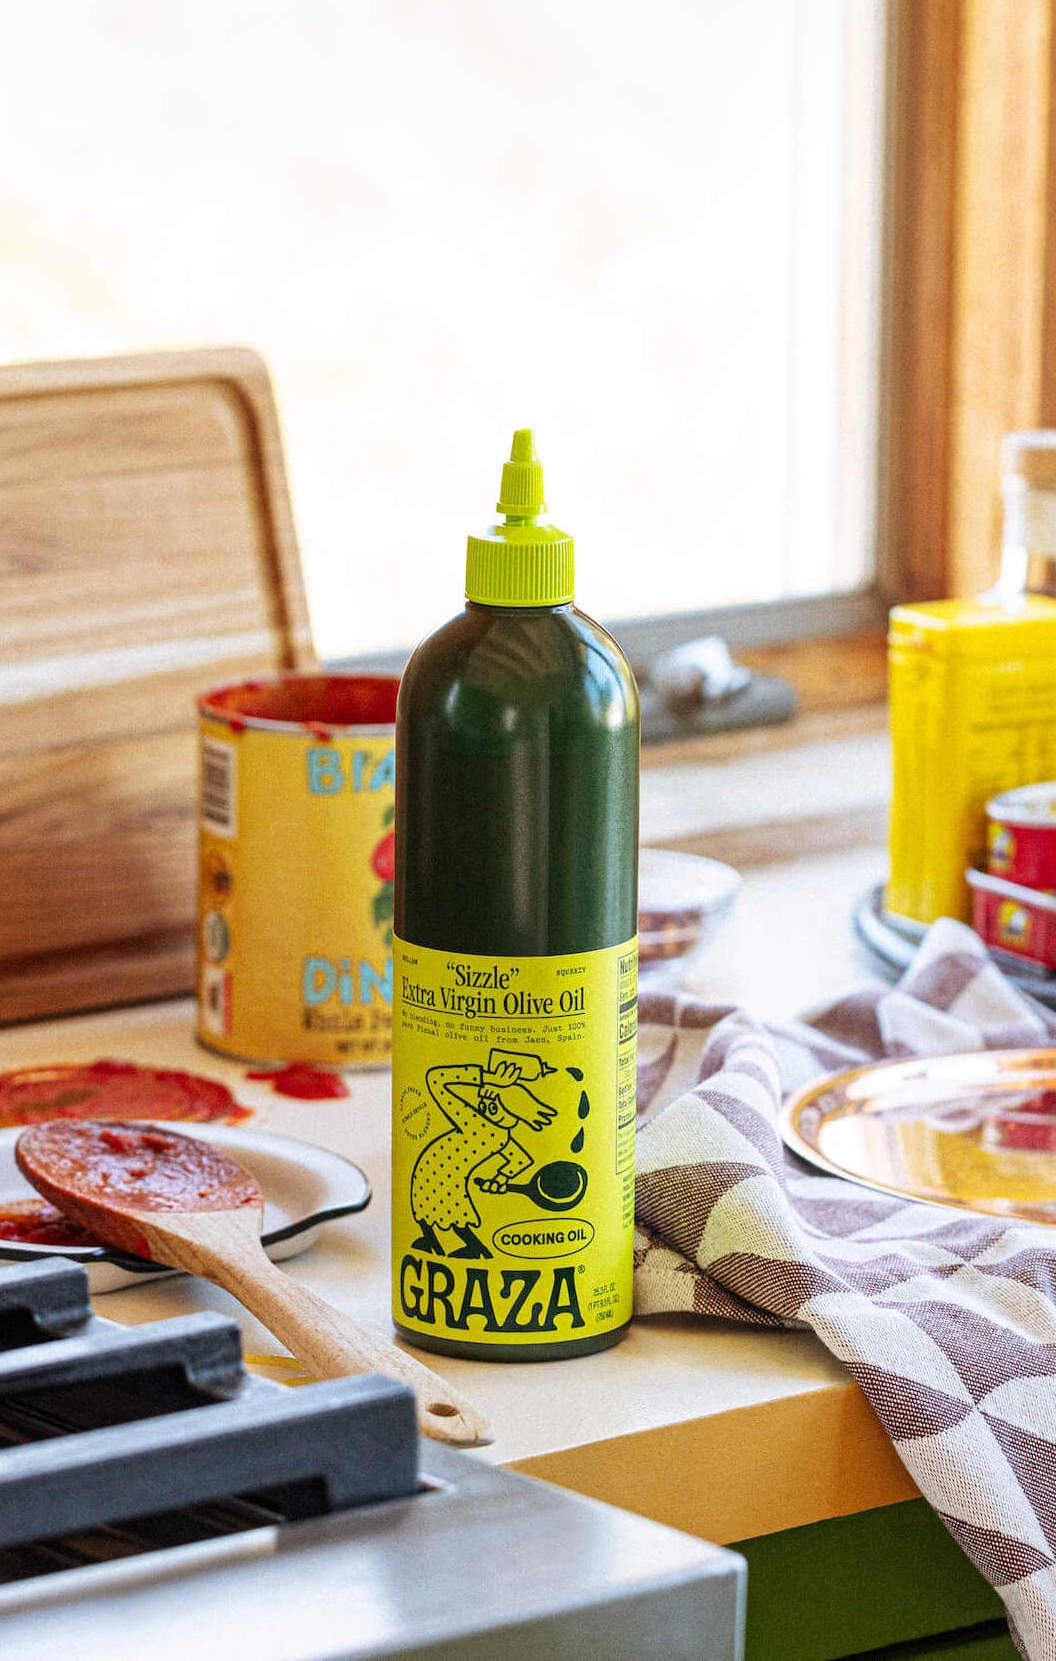 Graza Sizzle squeeze bottle with ingredients on countertop in kitchen setting